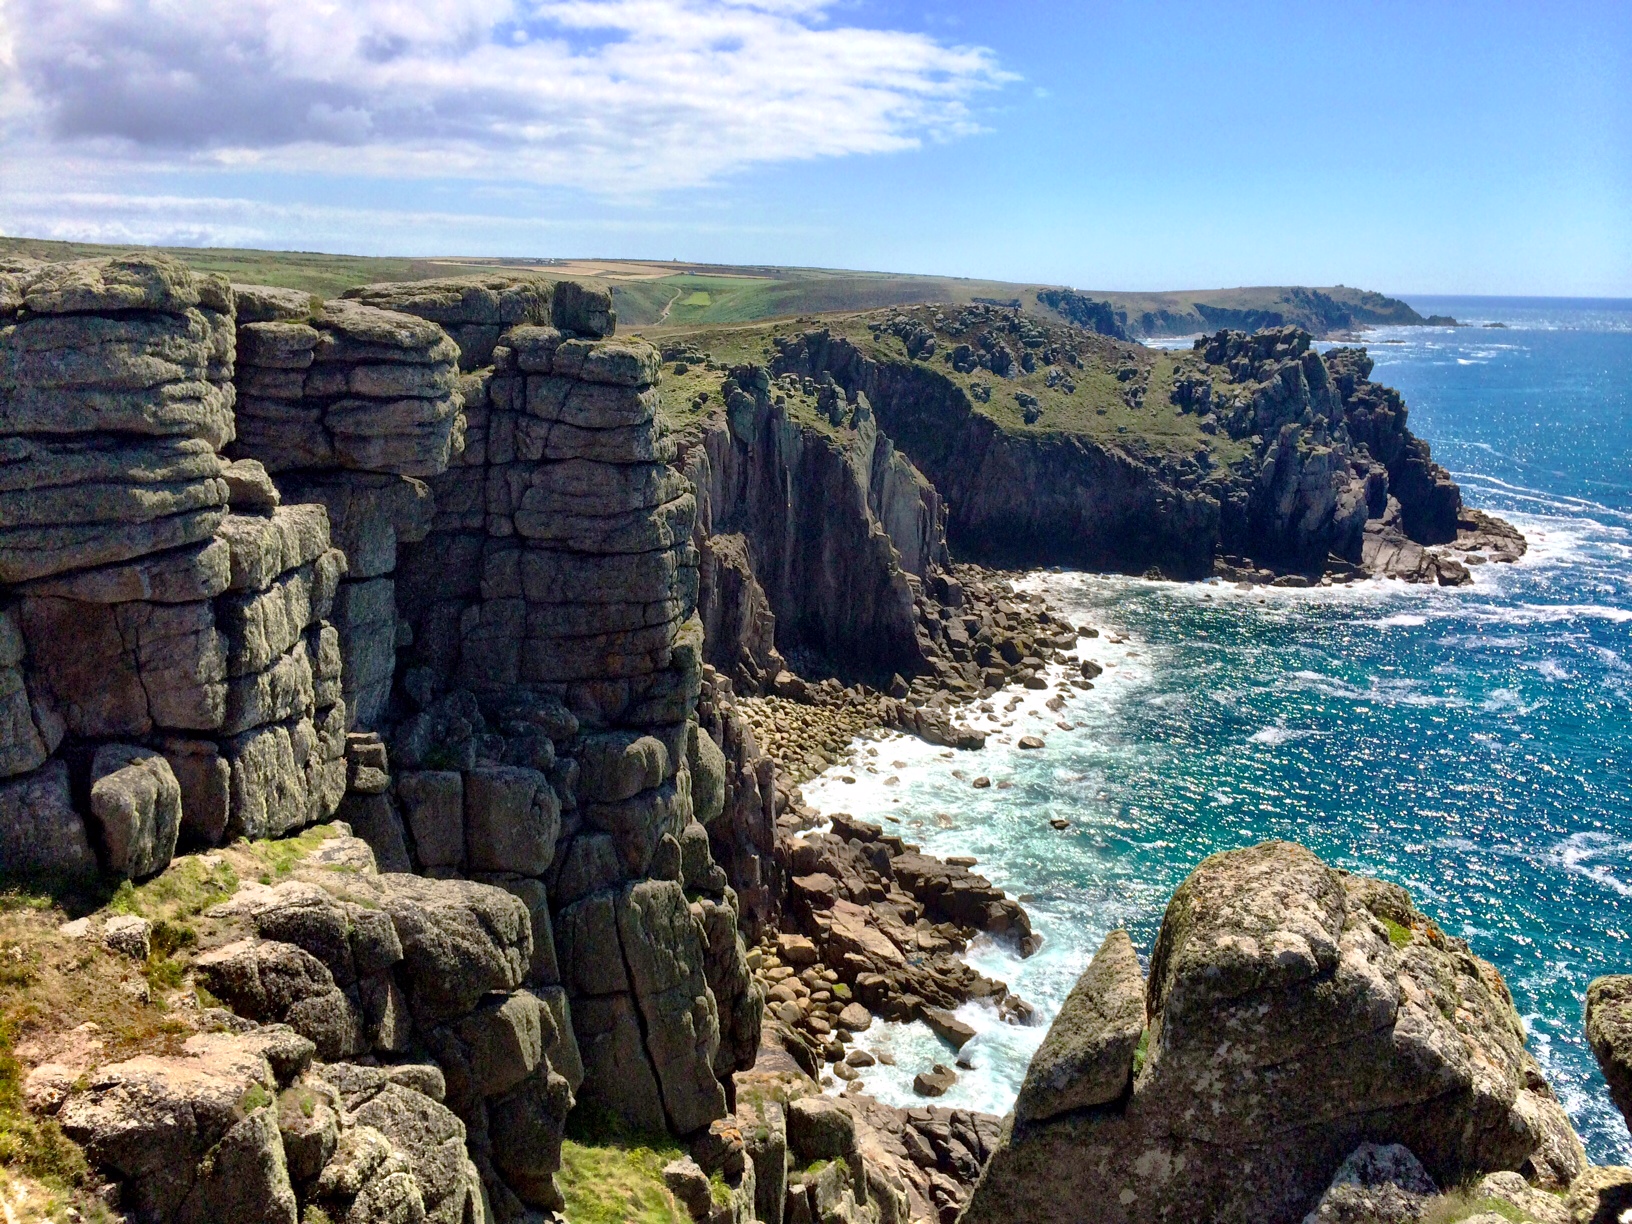 South West Coast Path – Sennen Cove to Porthcurno and Cross Country